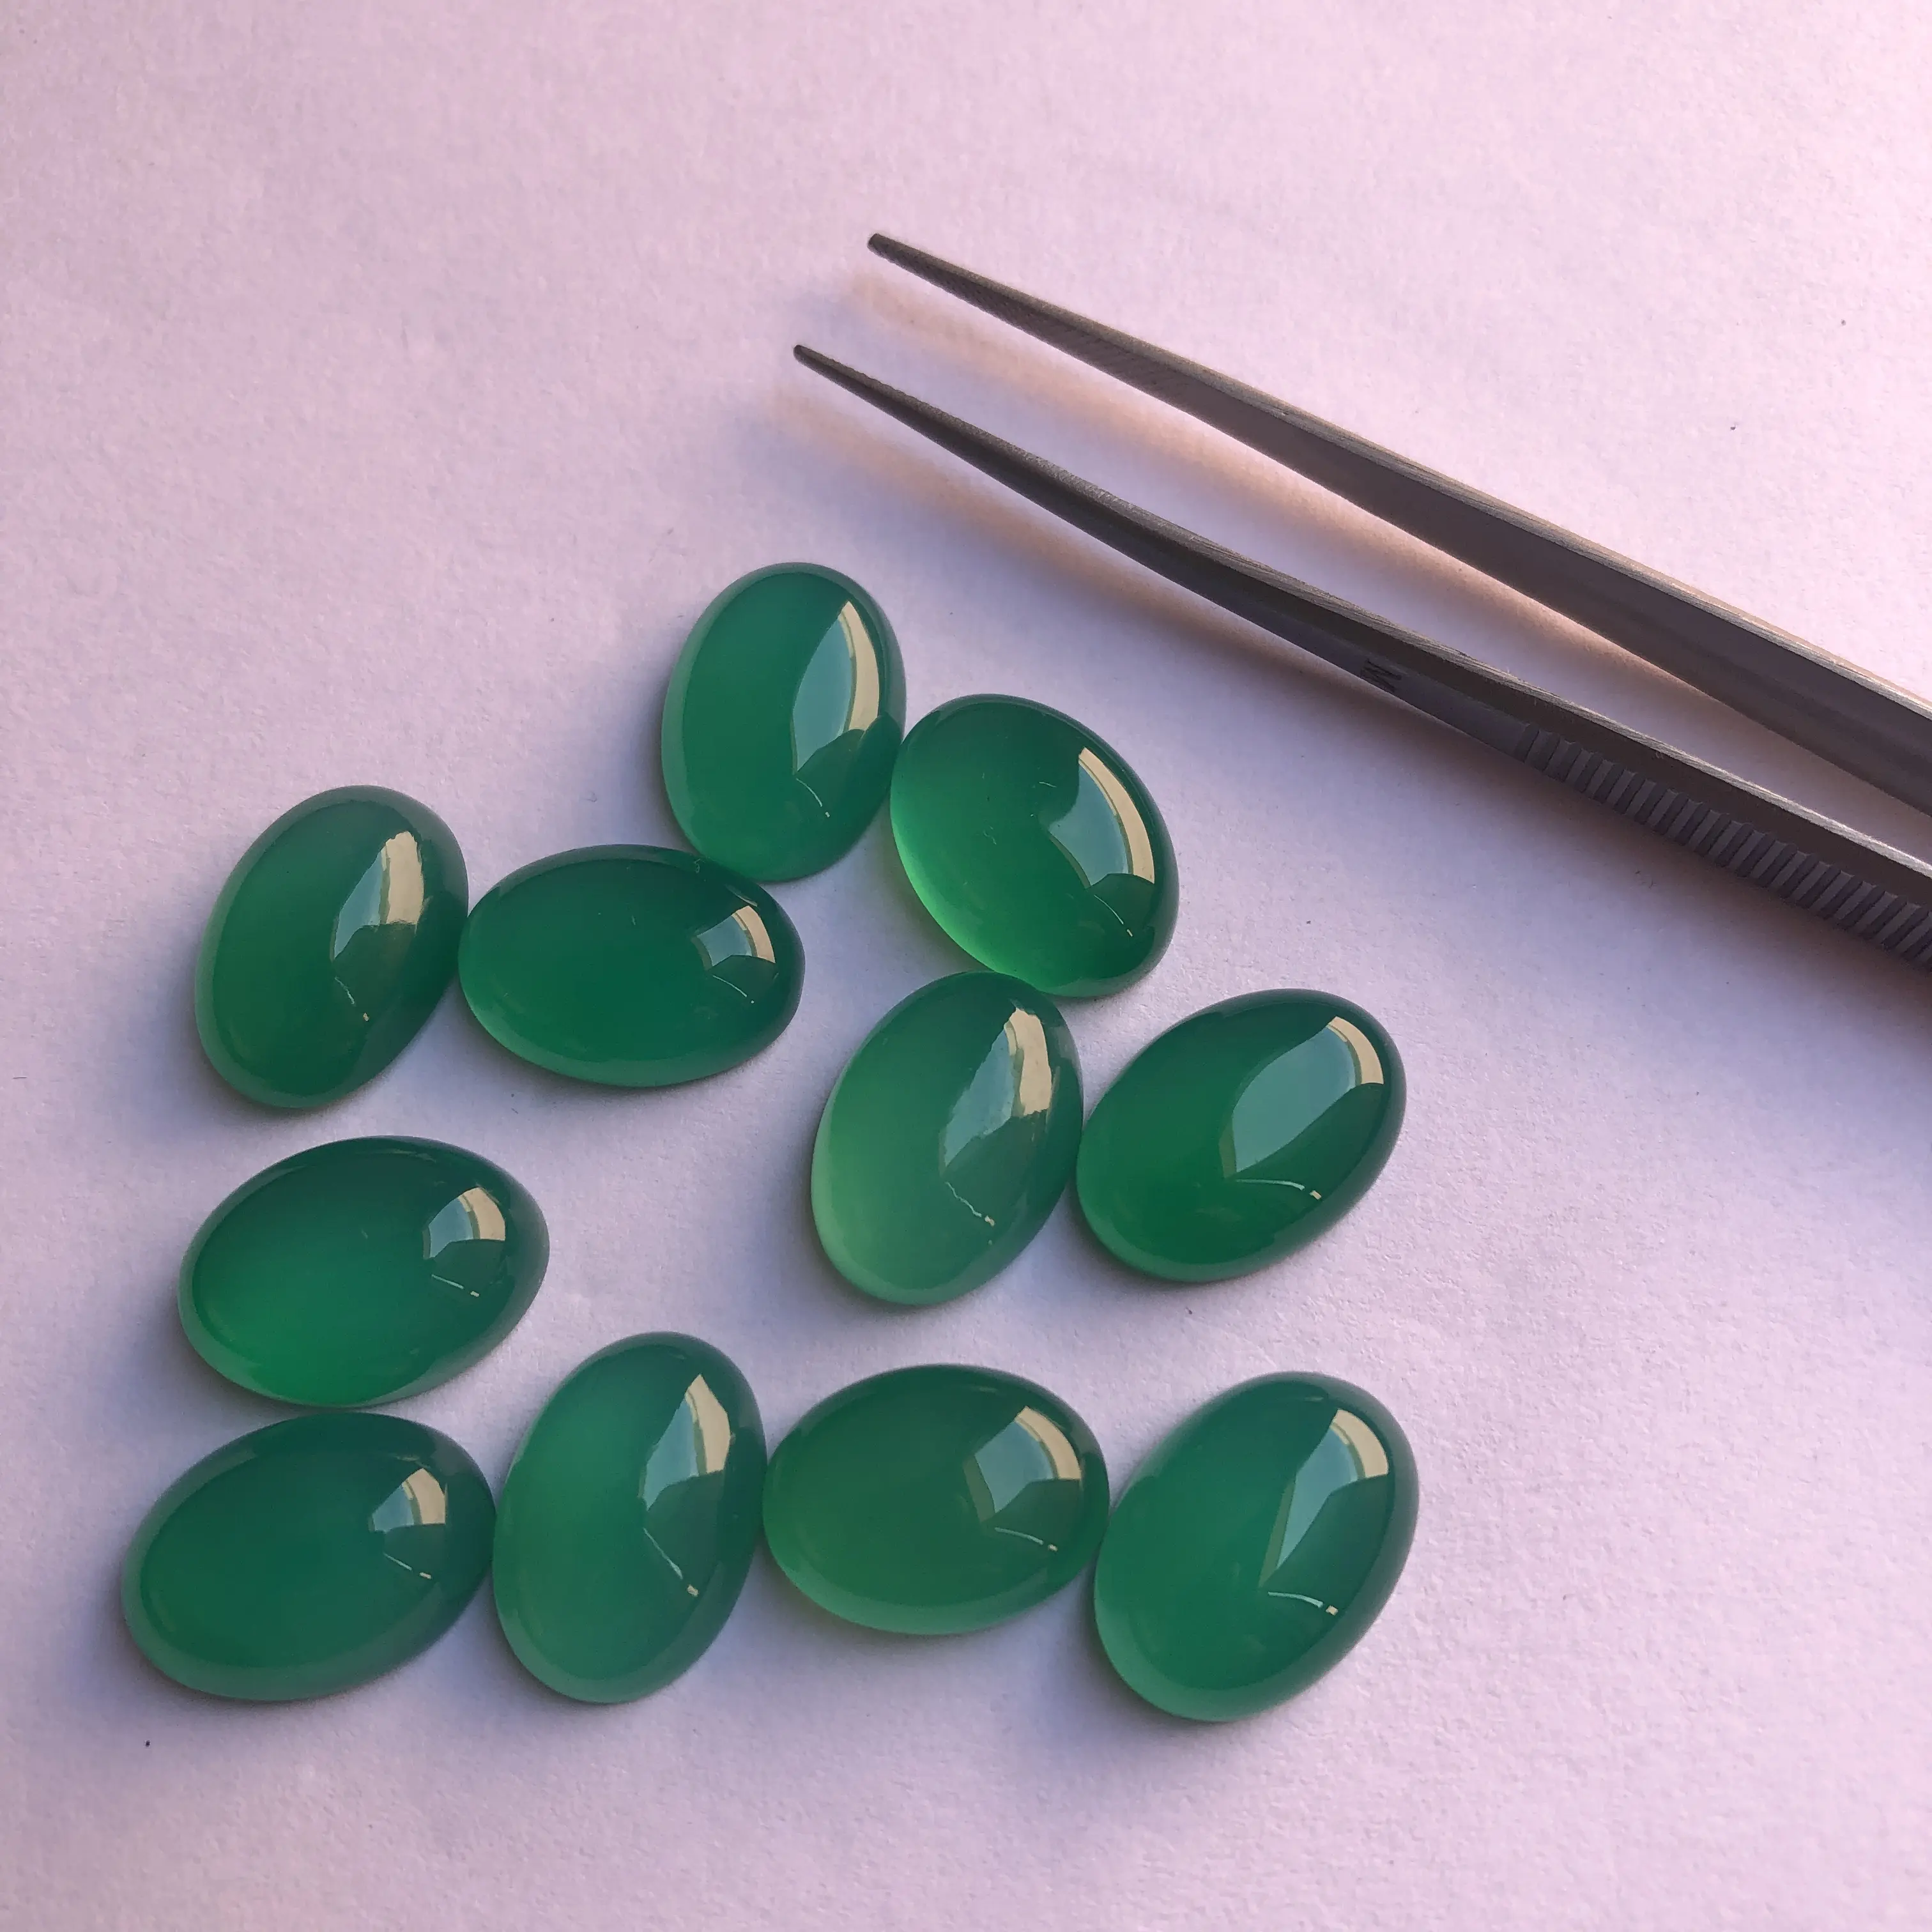 5x3mm Natural Green Onyx Smooth Oval Calibrated Cabochons Loose Gemstone Supplier Shop Online at Wholesale Price Closeout Deals